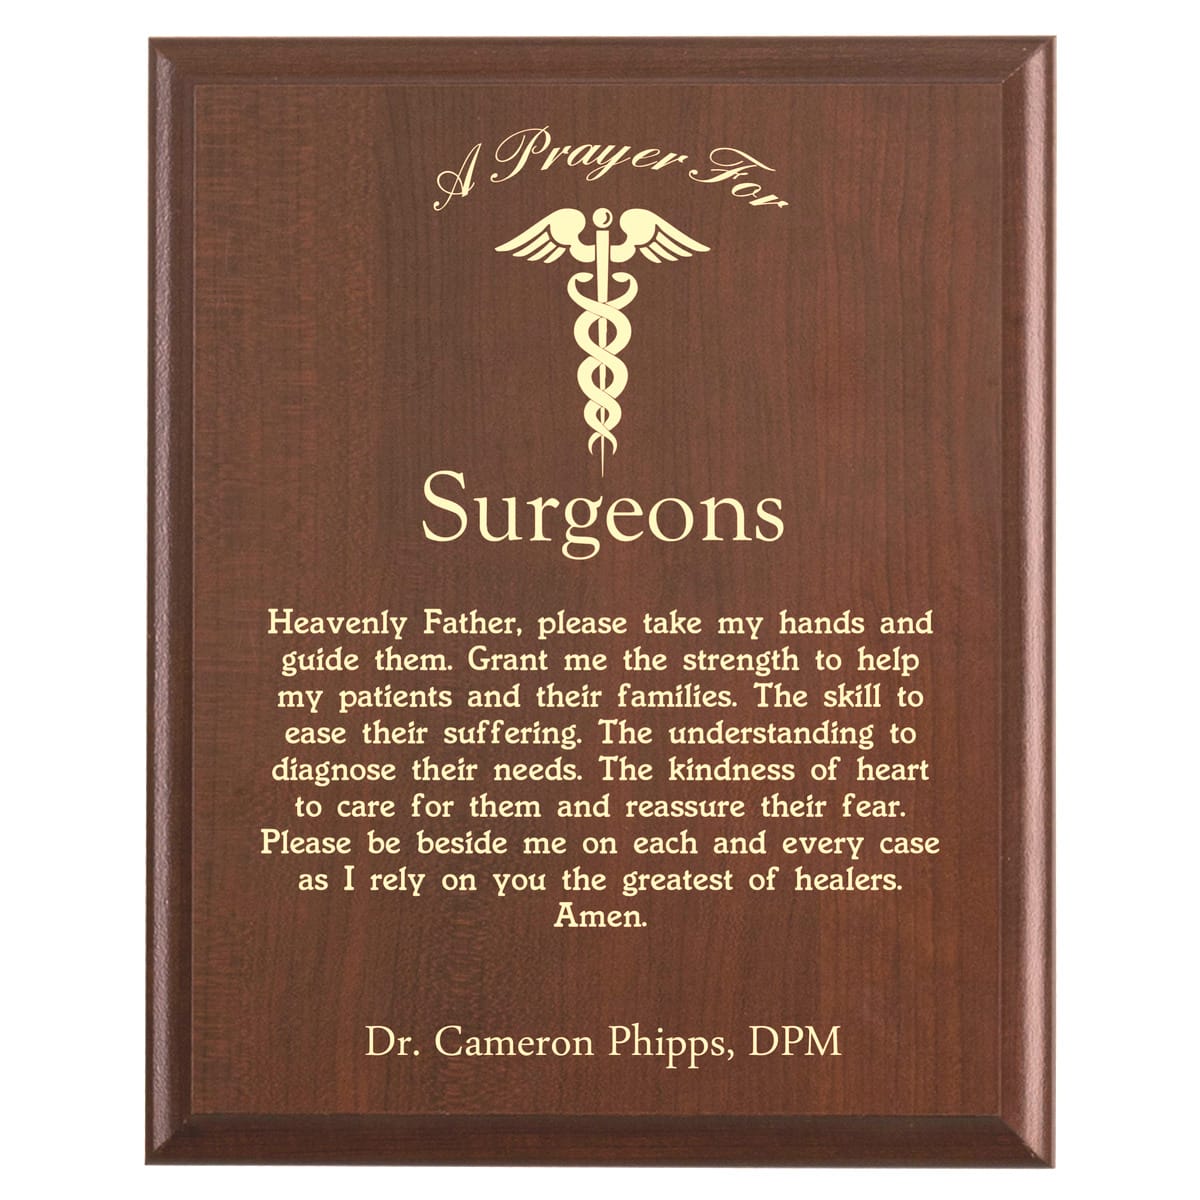 Plaque photo: Surgeon Prayer Plaque design with free personalization. Wood style finish with customized text.